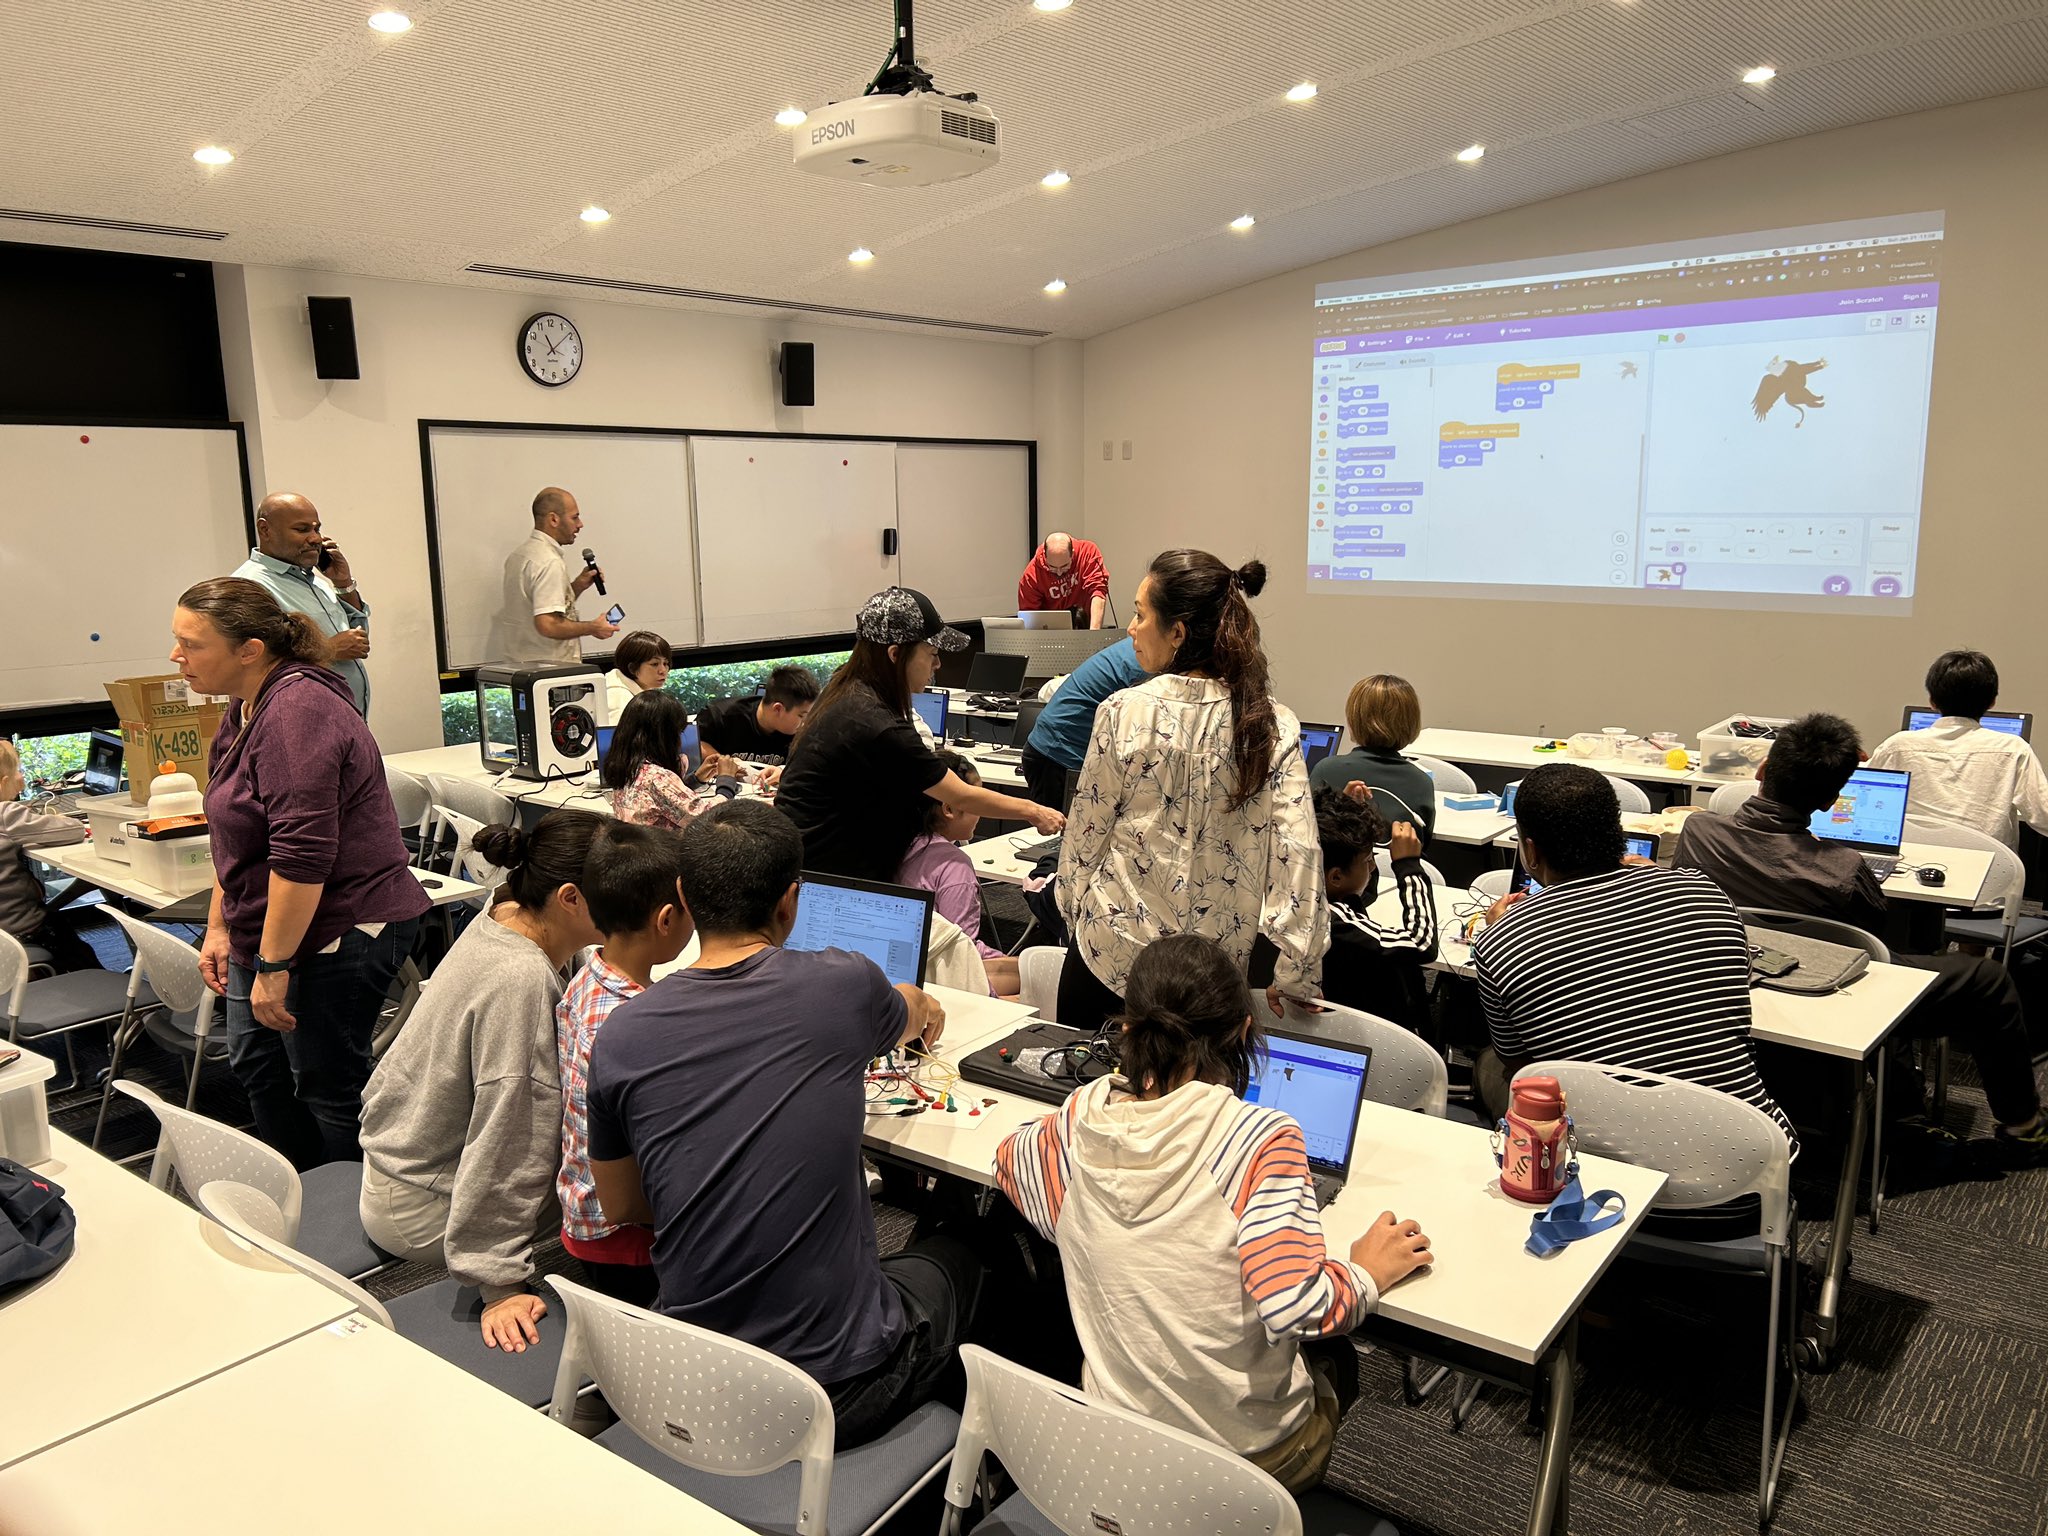 CoderDojo at OIST -The community of free, local coding clubs for kids and teens-